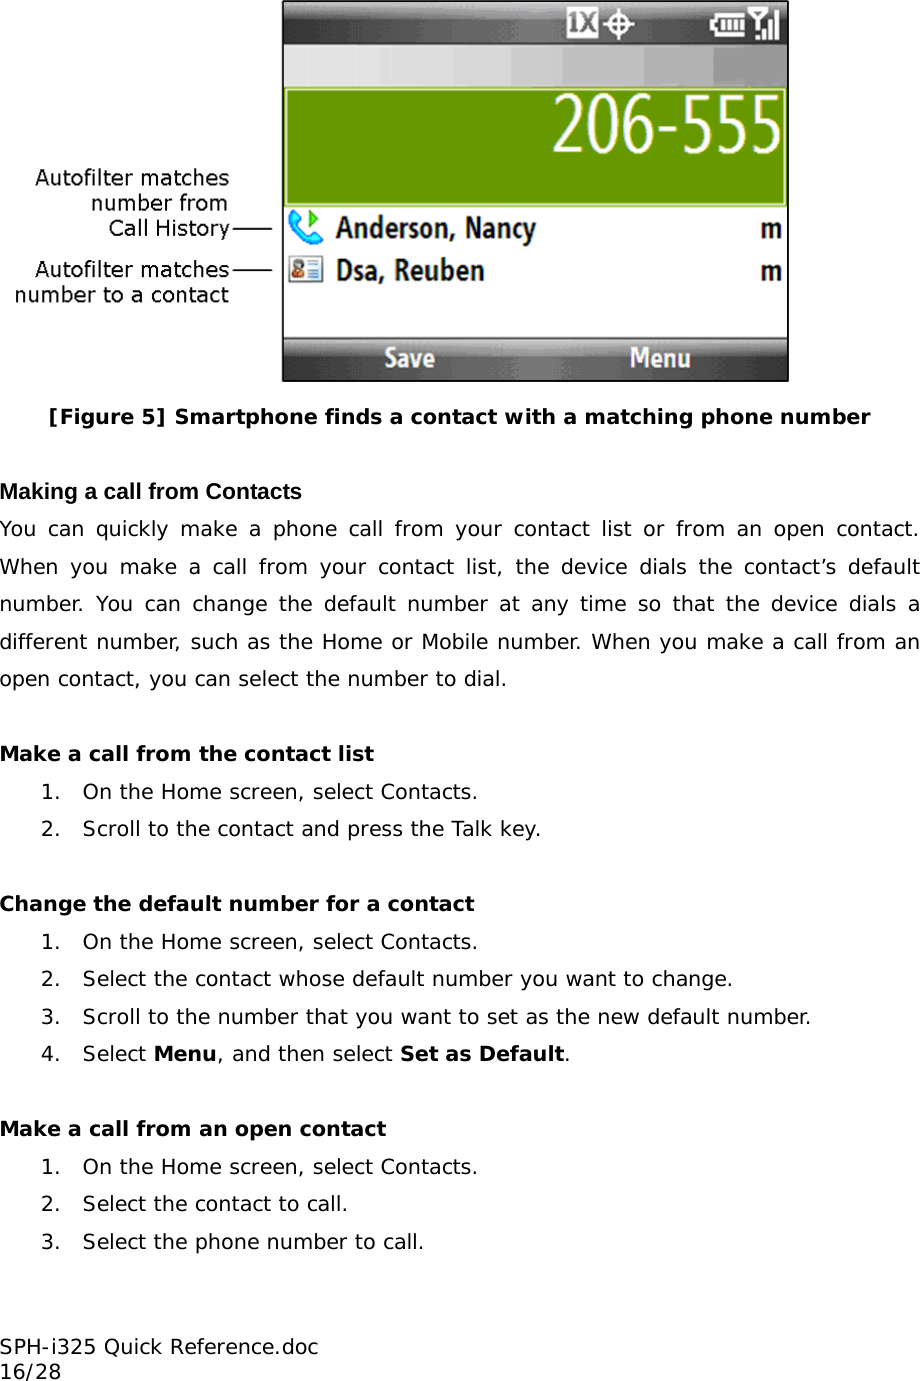  [Figure 5] Smartphone finds a contact with a matching phone number  Making a call from Contacts You can quickly make a phone call from your contact list or from an open contact. When you make a call from your contact list, the device dials the contact’s default number. You can change the default number at any time so that the device dials a different number, such as the Home or Mobile number. When you make a call from an open contact, you can select the number to dial.  Make a call from the contact list 1. On the Home screen, select Contacts. 2. Scroll to the contact and press the Talk key.  Change the default number for a contact 1. On the Home screen, select Contacts. 2. Select the contact whose default number you want to change. 3. Scroll to the number that you want to set as the new default number. 4. Select Menu, and then select Set as Default.  Make a call from an open contact 1. On the Home screen, select Contacts. 2. Select the contact to call. 3. Select the phone number to call.  SPH-i325 Quick Reference.doc                                                          16/28 